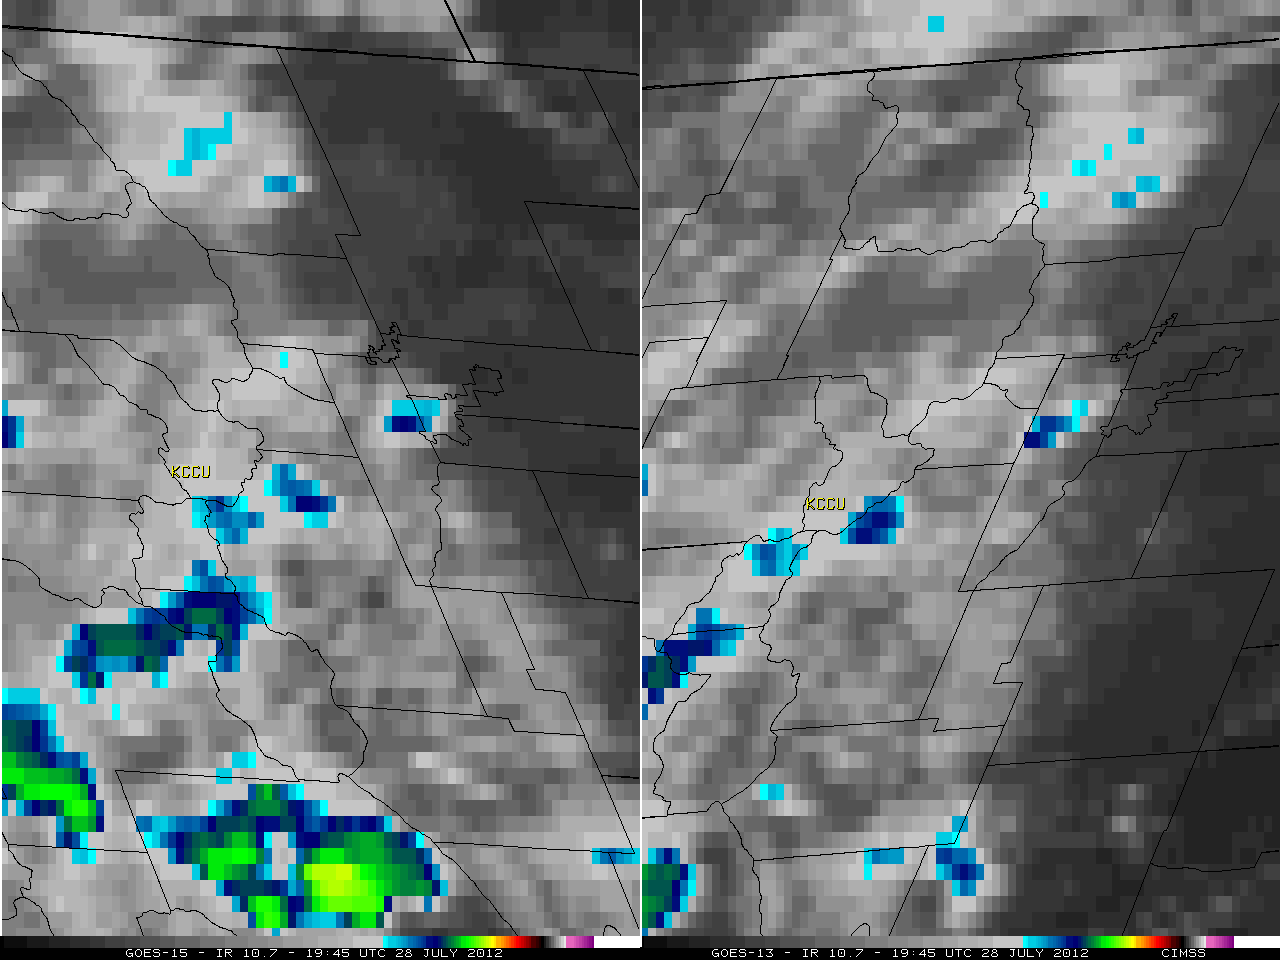 GOES-15 (left) and GOES-13 (right) 10.7 Âµm IR channel images